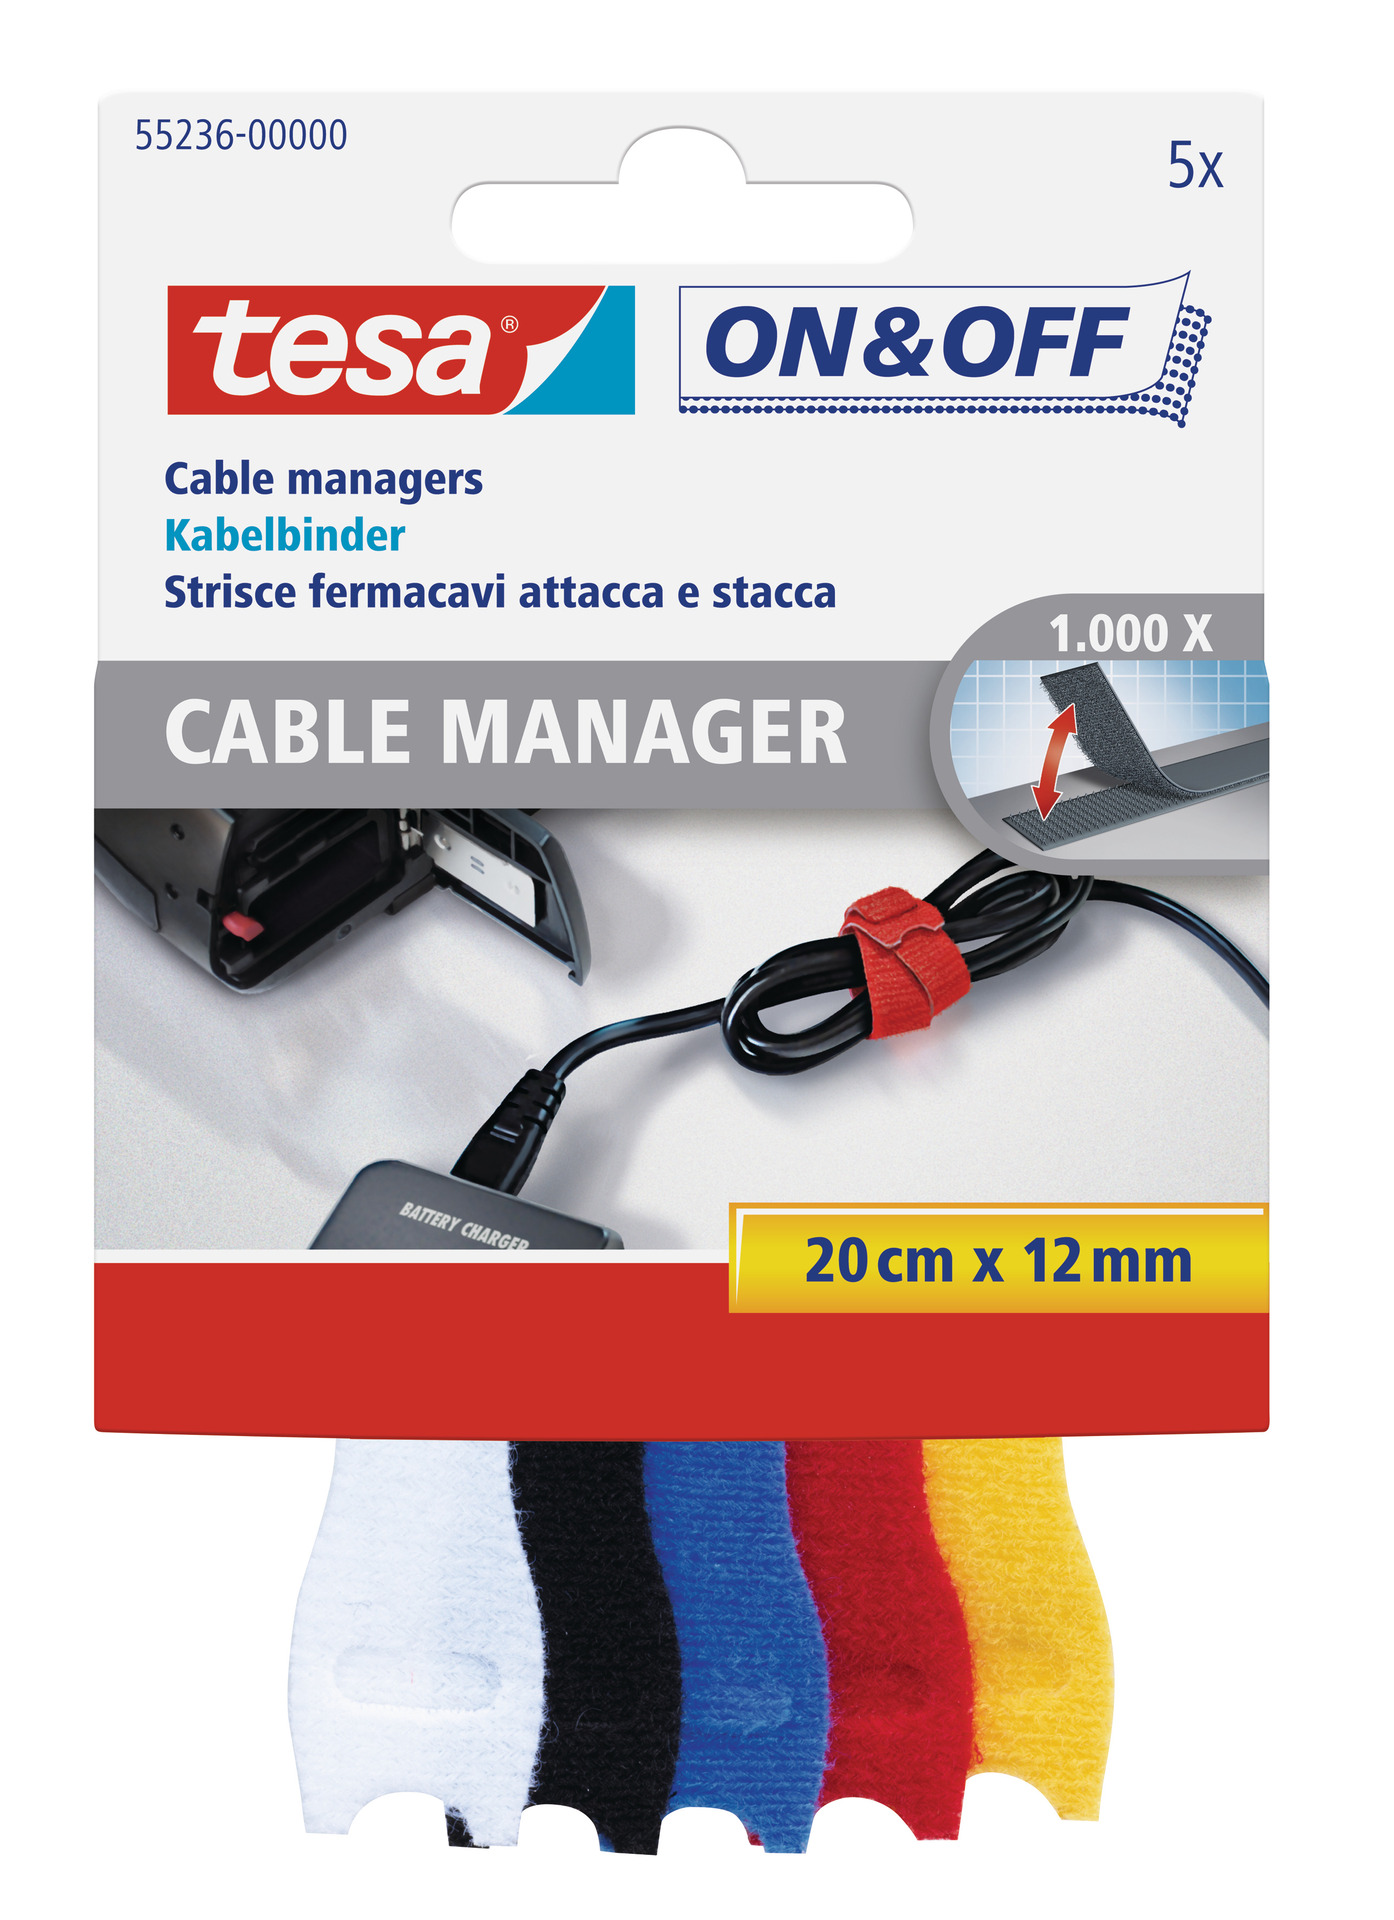 TESA SE Tesa On and Off 5 x Cable Manager bunt